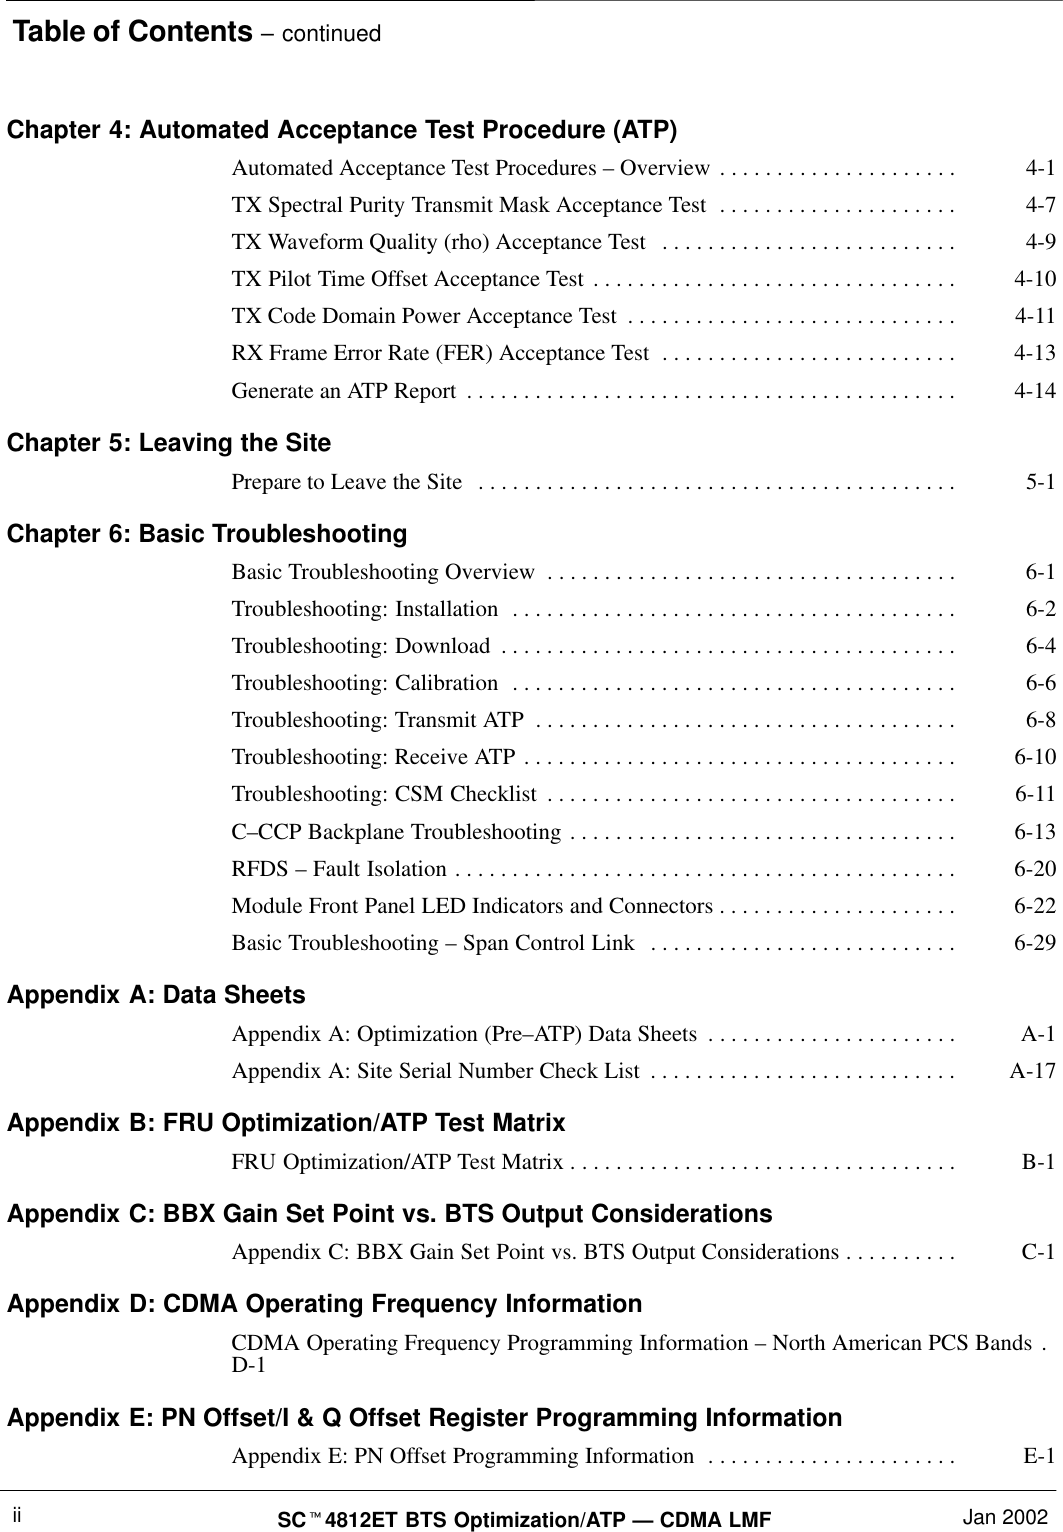 Table of Contents – continuedSCt4812ET BTS Optimization/ATP — CDMA LMF Jan 2002iiChapter 4: Automated Acceptance Test Procedure (ATP)Automated Acceptance Test Procedures – Overview 4-1. . . . . . . . . . . . . . . . . . . . . TX Spectral Purity Transmit Mask Acceptance Test 4-7. . . . . . . . . . . . . . . . . . . . . TX Waveform Quality (rho) Acceptance Test 4-9. . . . . . . . . . . . . . . . . . . . . . . . . . TX Pilot Time Offset Acceptance Test 4-10. . . . . . . . . . . . . . . . . . . . . . . . . . . . . . . . TX Code Domain Power Acceptance Test 4-11. . . . . . . . . . . . . . . . . . . . . . . . . . . . . RX Frame Error Rate (FER) Acceptance Test 4-13. . . . . . . . . . . . . . . . . . . . . . . . . . Generate an ATP Report 4-14. . . . . . . . . . . . . . . . . . . . . . . . . . . . . . . . . . . . . . . . . . . Chapter 5: Leaving the SitePrepare to Leave the Site 5-1. . . . . . . . . . . . . . . . . . . . . . . . . . . . . . . . . . . . . . . . . . Chapter 6: Basic TroubleshootingBasic Troubleshooting Overview 6-1. . . . . . . . . . . . . . . . . . . . . . . . . . . . . . . . . . . . Troubleshooting: Installation 6-2. . . . . . . . . . . . . . . . . . . . . . . . . . . . . . . . . . . . . . . Troubleshooting: Download 6-4. . . . . . . . . . . . . . . . . . . . . . . . . . . . . . . . . . . . . . . . Troubleshooting: Calibration 6-6. . . . . . . . . . . . . . . . . . . . . . . . . . . . . . . . . . . . . . . Troubleshooting: Transmit ATP 6-8. . . . . . . . . . . . . . . . . . . . . . . . . . . . . . . . . . . . . Troubleshooting: Receive ATP 6-10. . . . . . . . . . . . . . . . . . . . . . . . . . . . . . . . . . . . . . Troubleshooting: CSM Checklist 6-11. . . . . . . . . . . . . . . . . . . . . . . . . . . . . . . . . . . . C–CCP Backplane Troubleshooting 6-13. . . . . . . . . . . . . . . . . . . . . . . . . . . . . . . . . . RFDS – Fault Isolation 6-20. . . . . . . . . . . . . . . . . . . . . . . . . . . . . . . . . . . . . . . . . . . . Module Front Panel LED Indicators and Connectors 6-22. . . . . . . . . . . . . . . . . . . . . Basic Troubleshooting – Span Control Link 6-29. . . . . . . . . . . . . . . . . . . . . . . . . . . Appendix A: Data SheetsAppendix A: Optimization (Pre–ATP) Data Sheets A-1. . . . . . . . . . . . . . . . . . . . . . Appendix A: Site Serial Number Check List A-17. . . . . . . . . . . . . . . . . . . . . . . . . . . Appendix B: FRU Optimization/ATP Test MatrixFRU Optimization/ATP Test Matrix B-1. . . . . . . . . . . . . . . . . . . . . . . . . . . . . . . . . . Appendix C: BBX Gain Set Point vs. BTS Output ConsiderationsAppendix C: BBX Gain Set Point vs. BTS Output Considerations C-1. . . . . . . . . . Appendix D: CDMA Operating Frequency InformationCDMA Operating Frequency Programming Information – North American PCS Bands . D-1Appendix E: PN Offset/I &amp; Q Offset Register Programming InformationAppendix E: PN Offset Programming Information E-1. . . . . . . . . . . . . . . . . . . . . . 